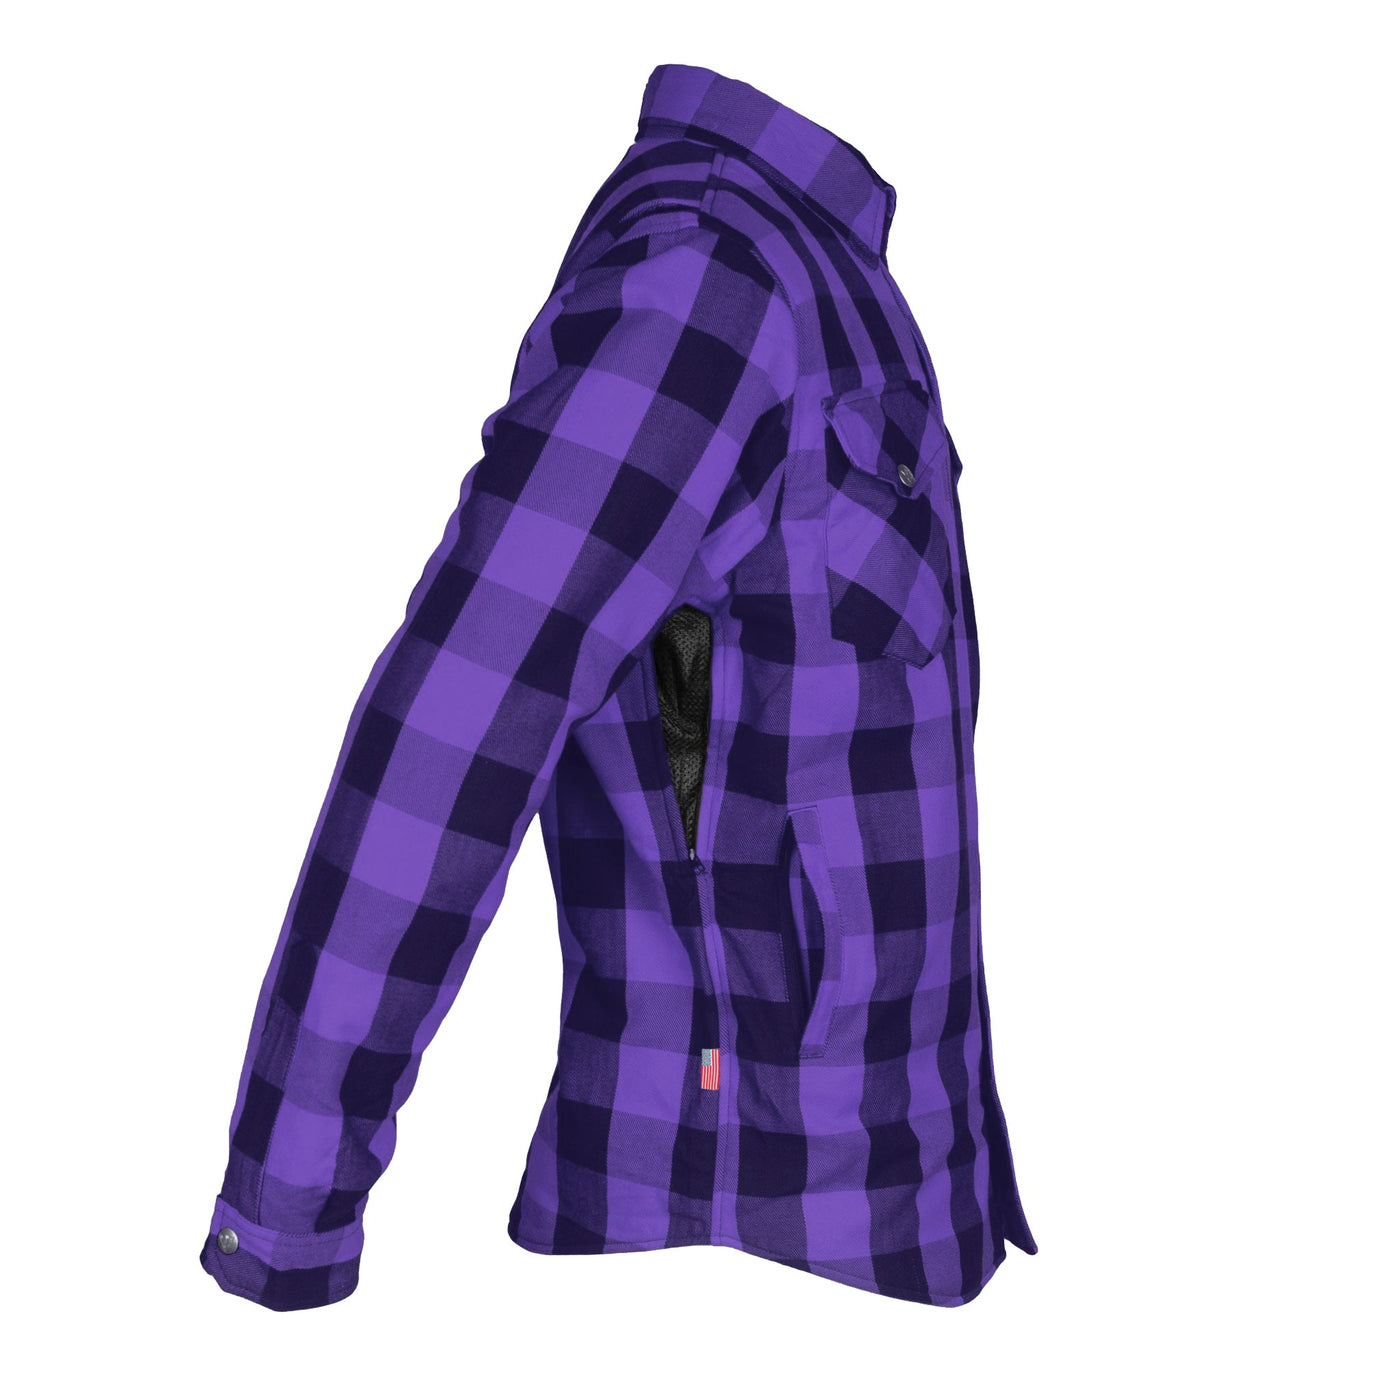 Protective Flannel Shirt with Pads "Purple Rain" - Purple and Black Checkered